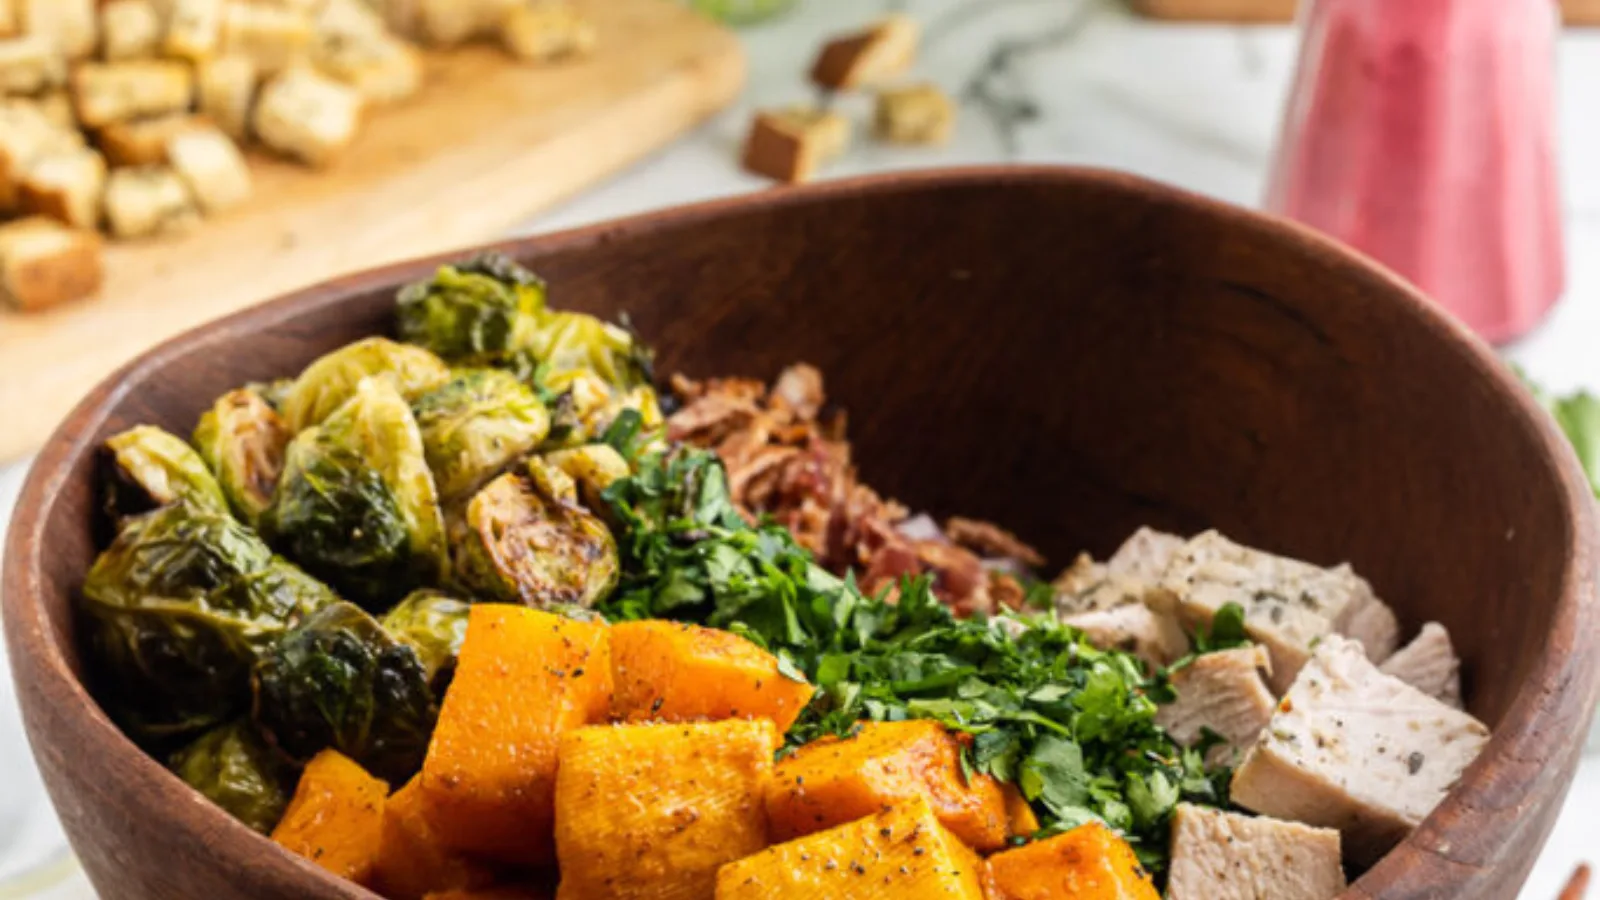 A bowl of salad with butternut squash, turkey and brussels sprouts.